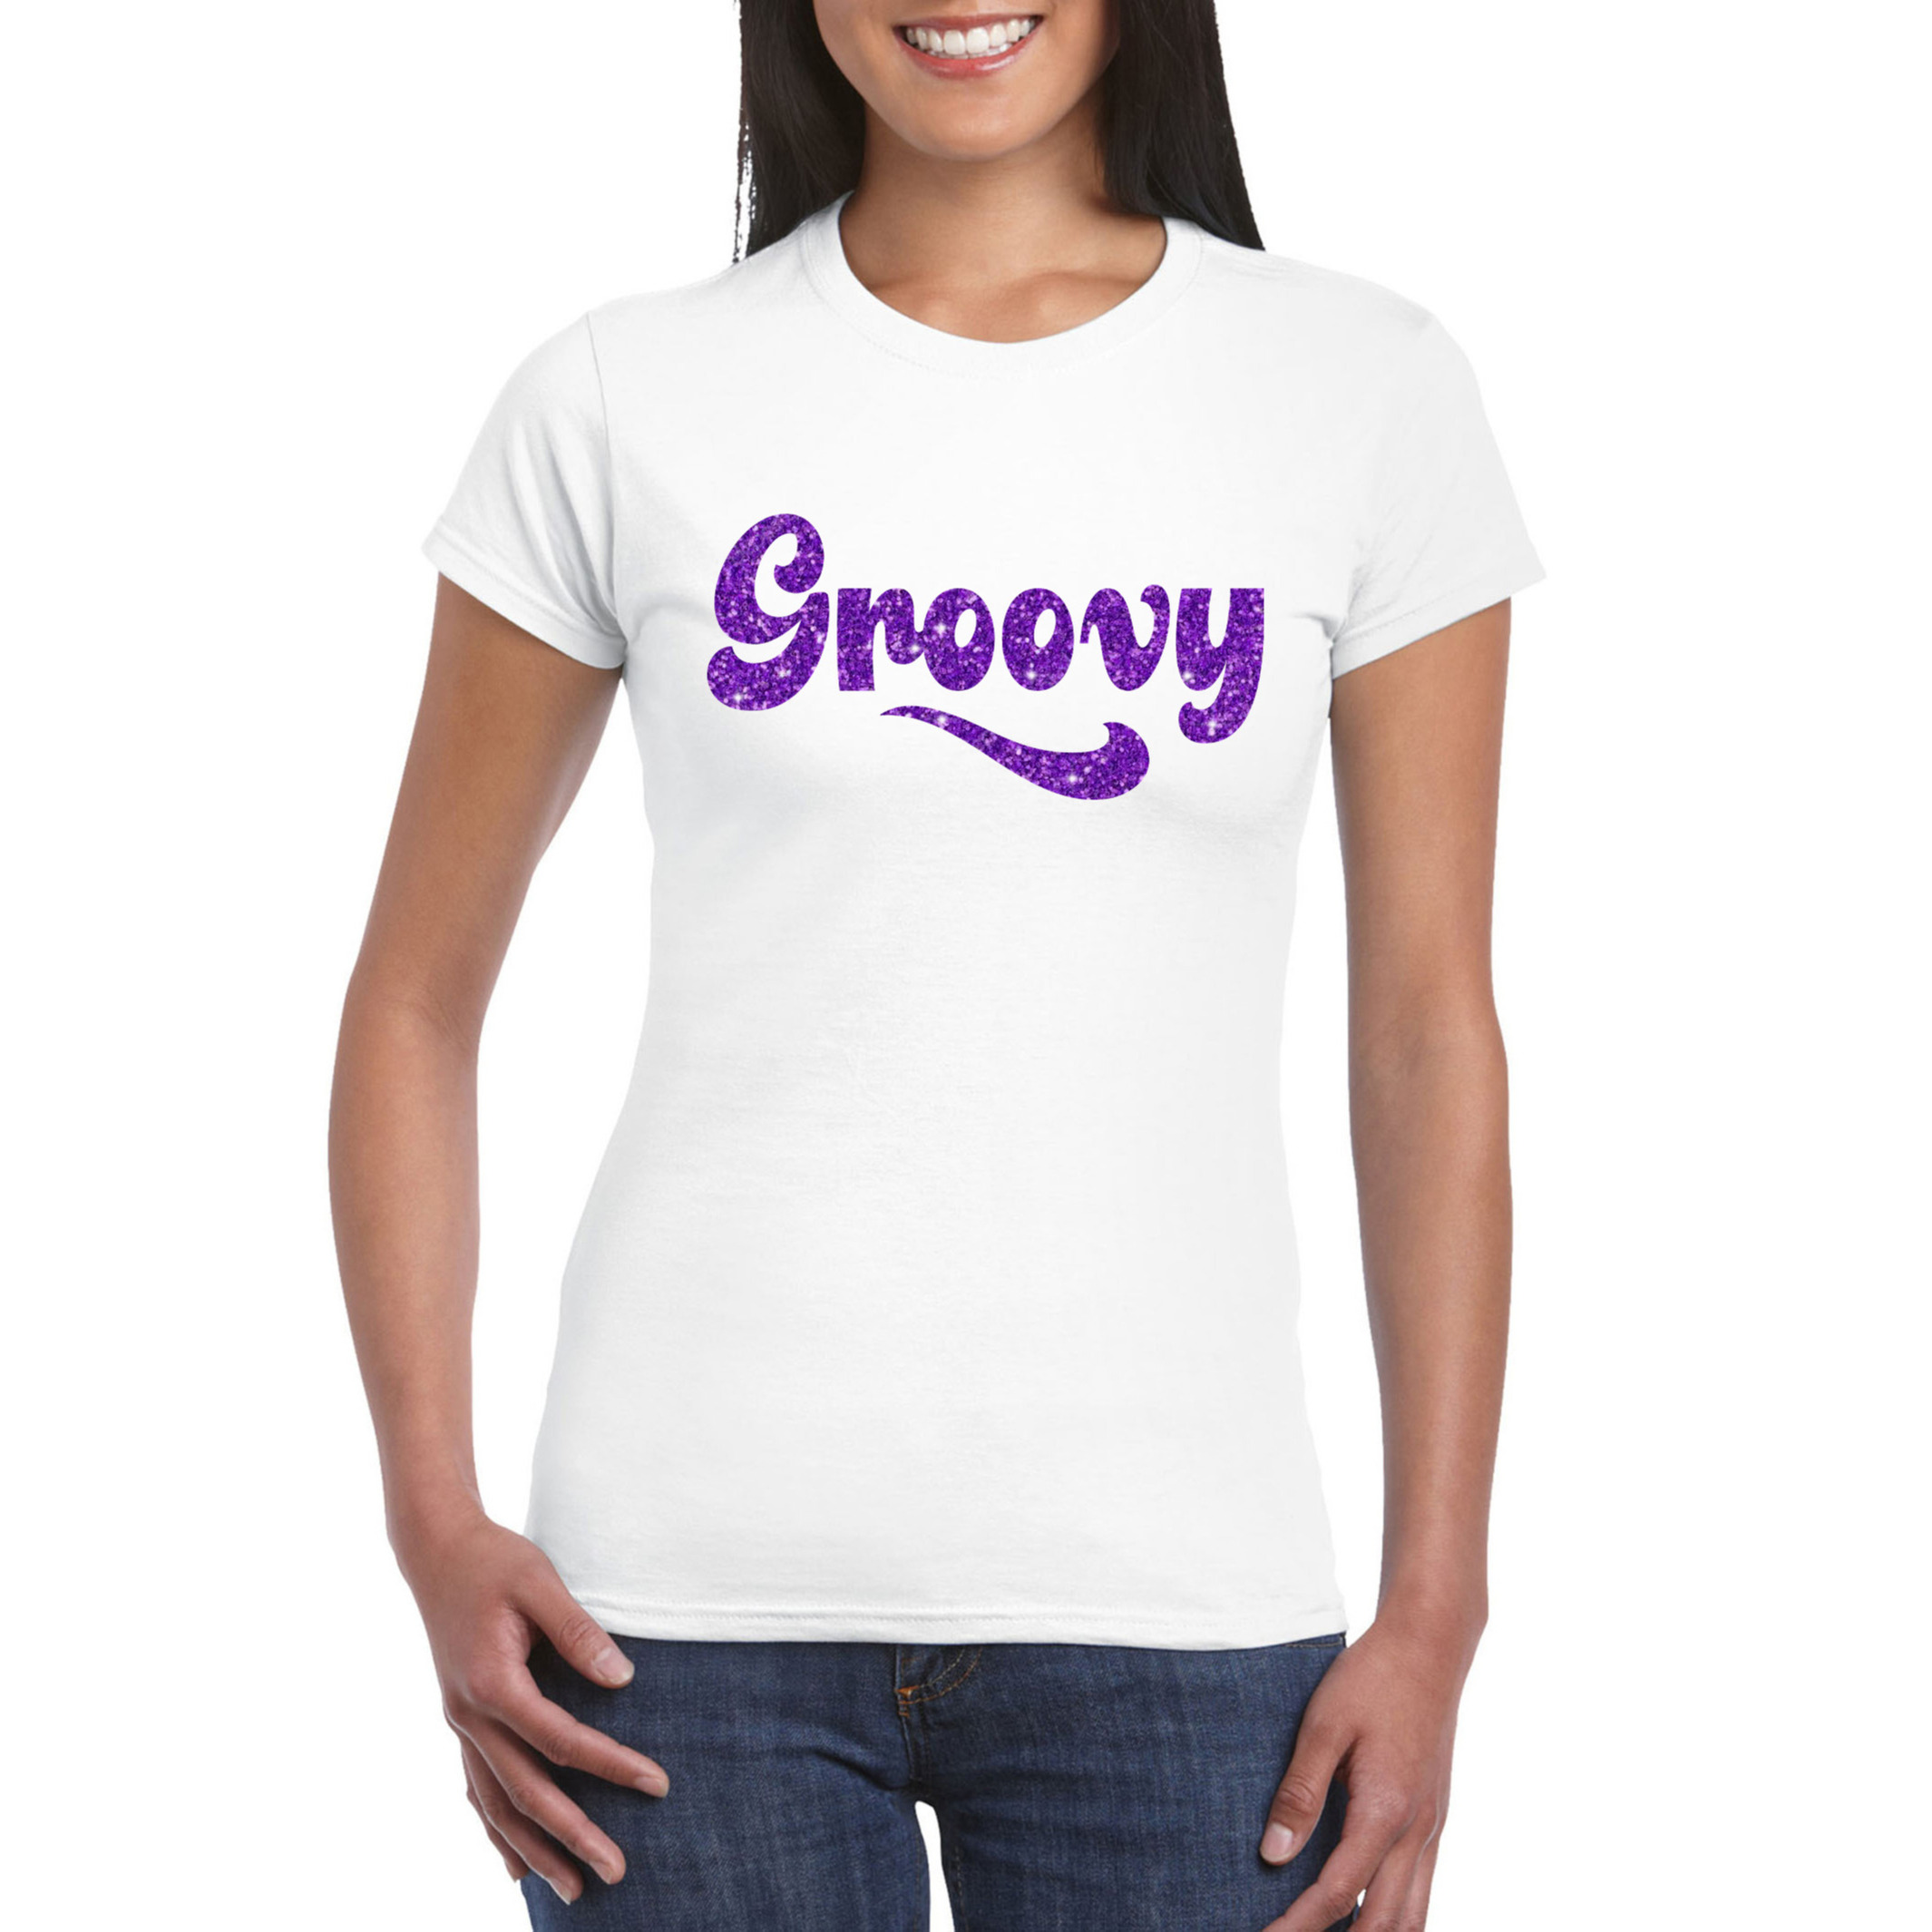 Wit Flower Power t-shirt Groovy met paarse letters dames